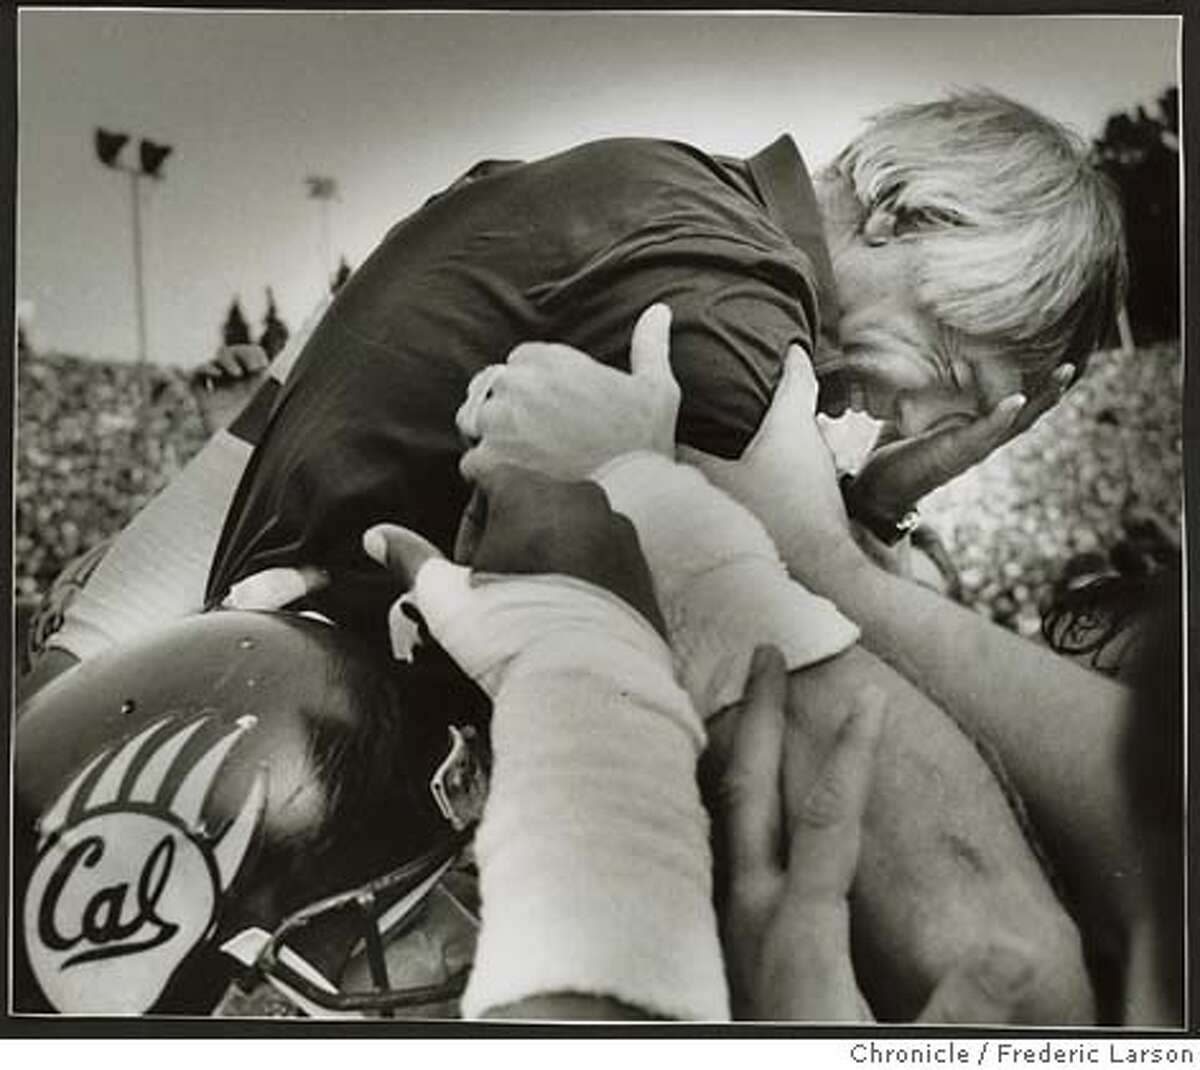 Joe Kapp face showing emotion as he is carried off the field by players. Cal wins Big Game over Stanford. 11/22/86